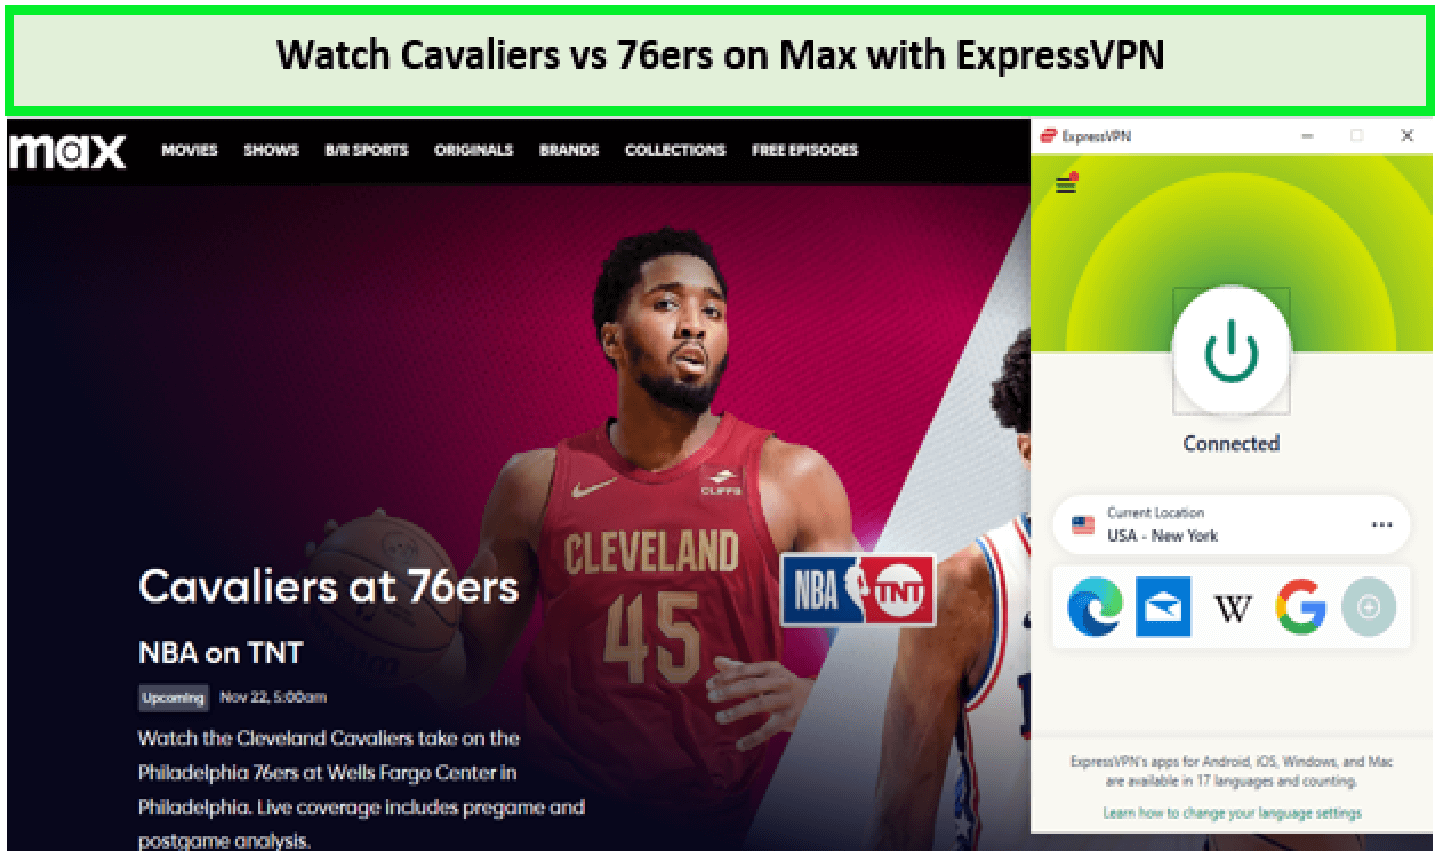 Watch-Cavaliers-vs-76ers-in-South Korea-on-Max-with-ExpressVPN